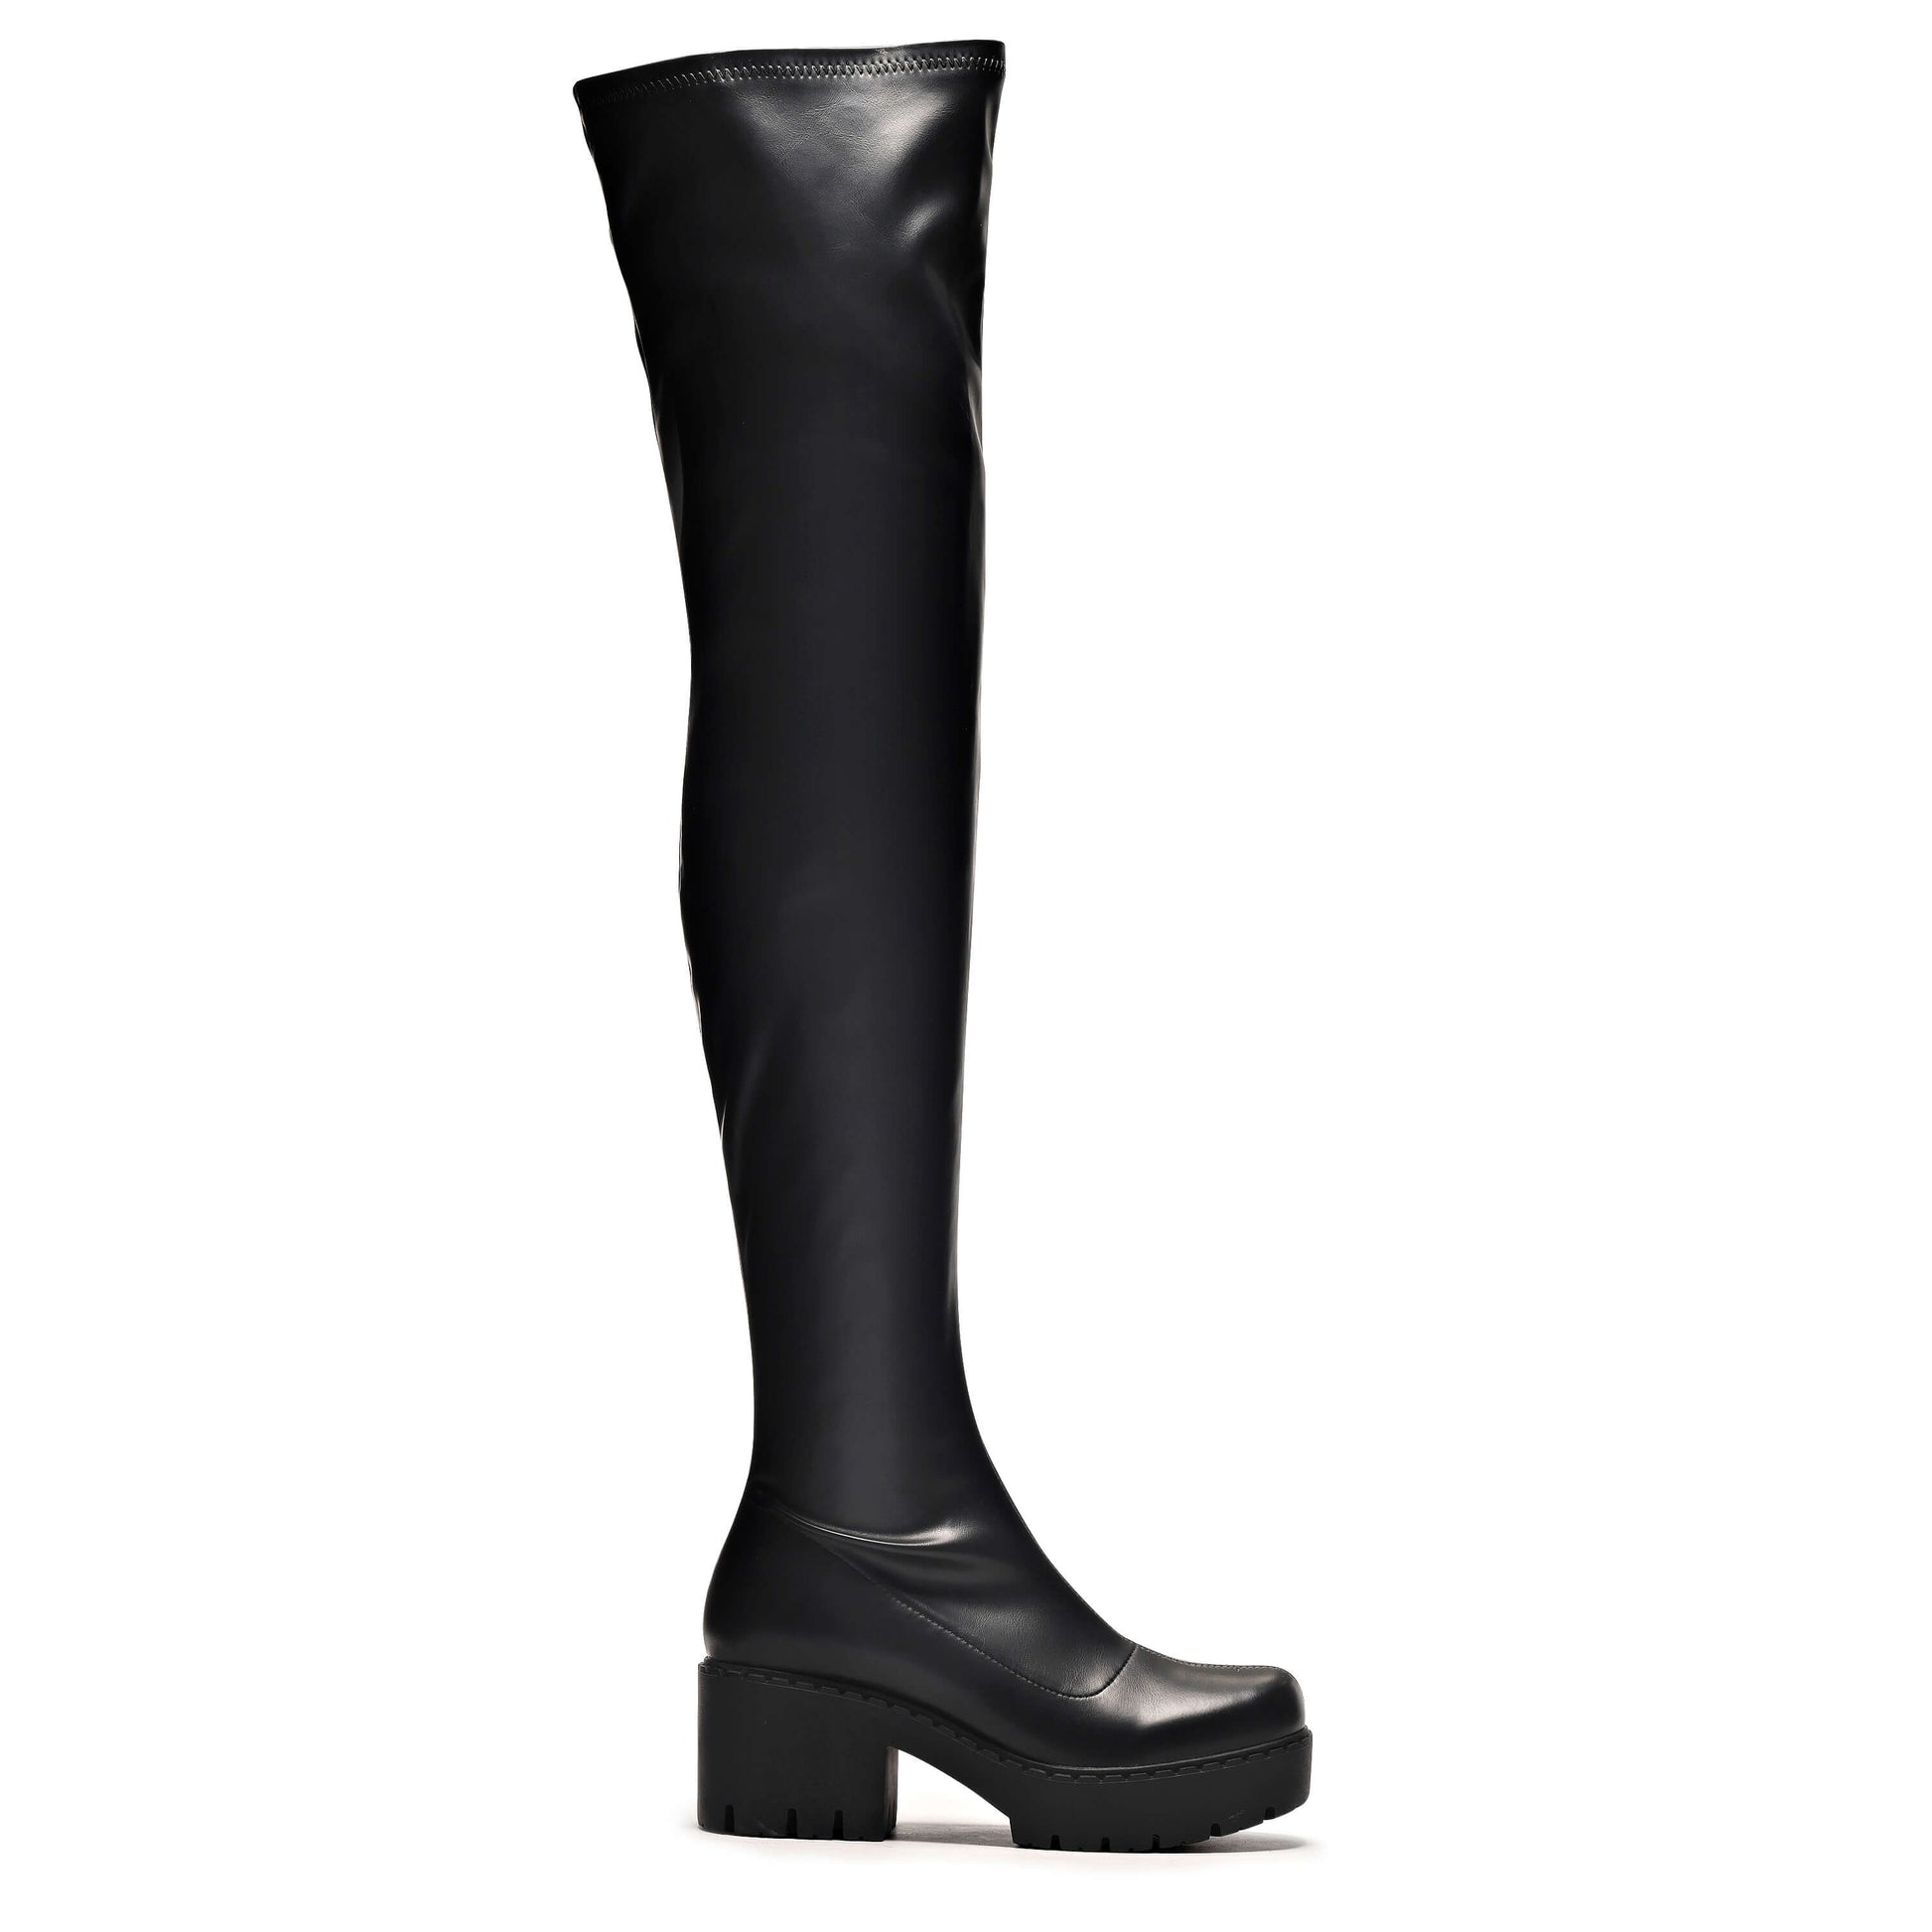 The Harmony Stretch Thigh High Boots - Long Boots - KOI Footwear - Black - Side View